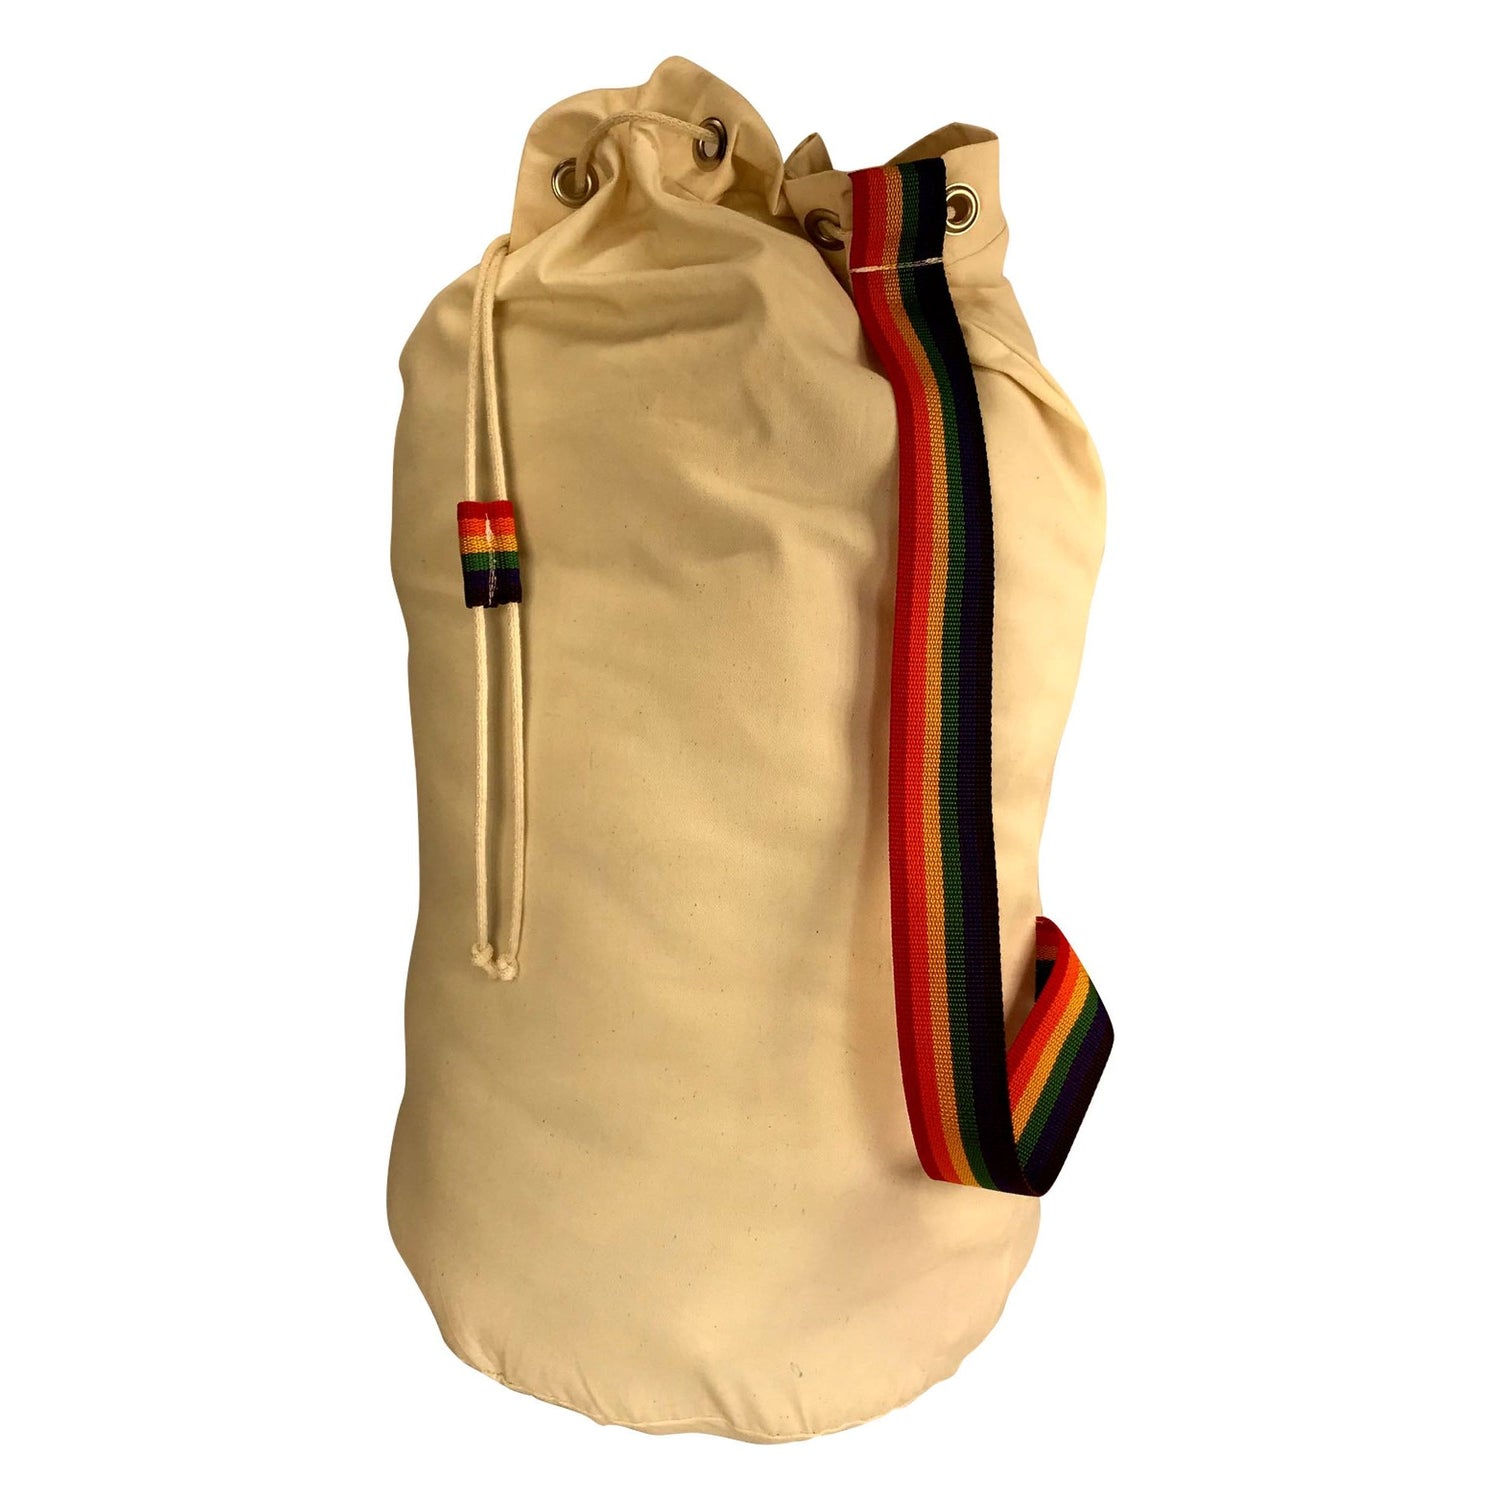 28'' x 14'' Cotton Bags with Rainbow Strap, $9.00/ 1 bag